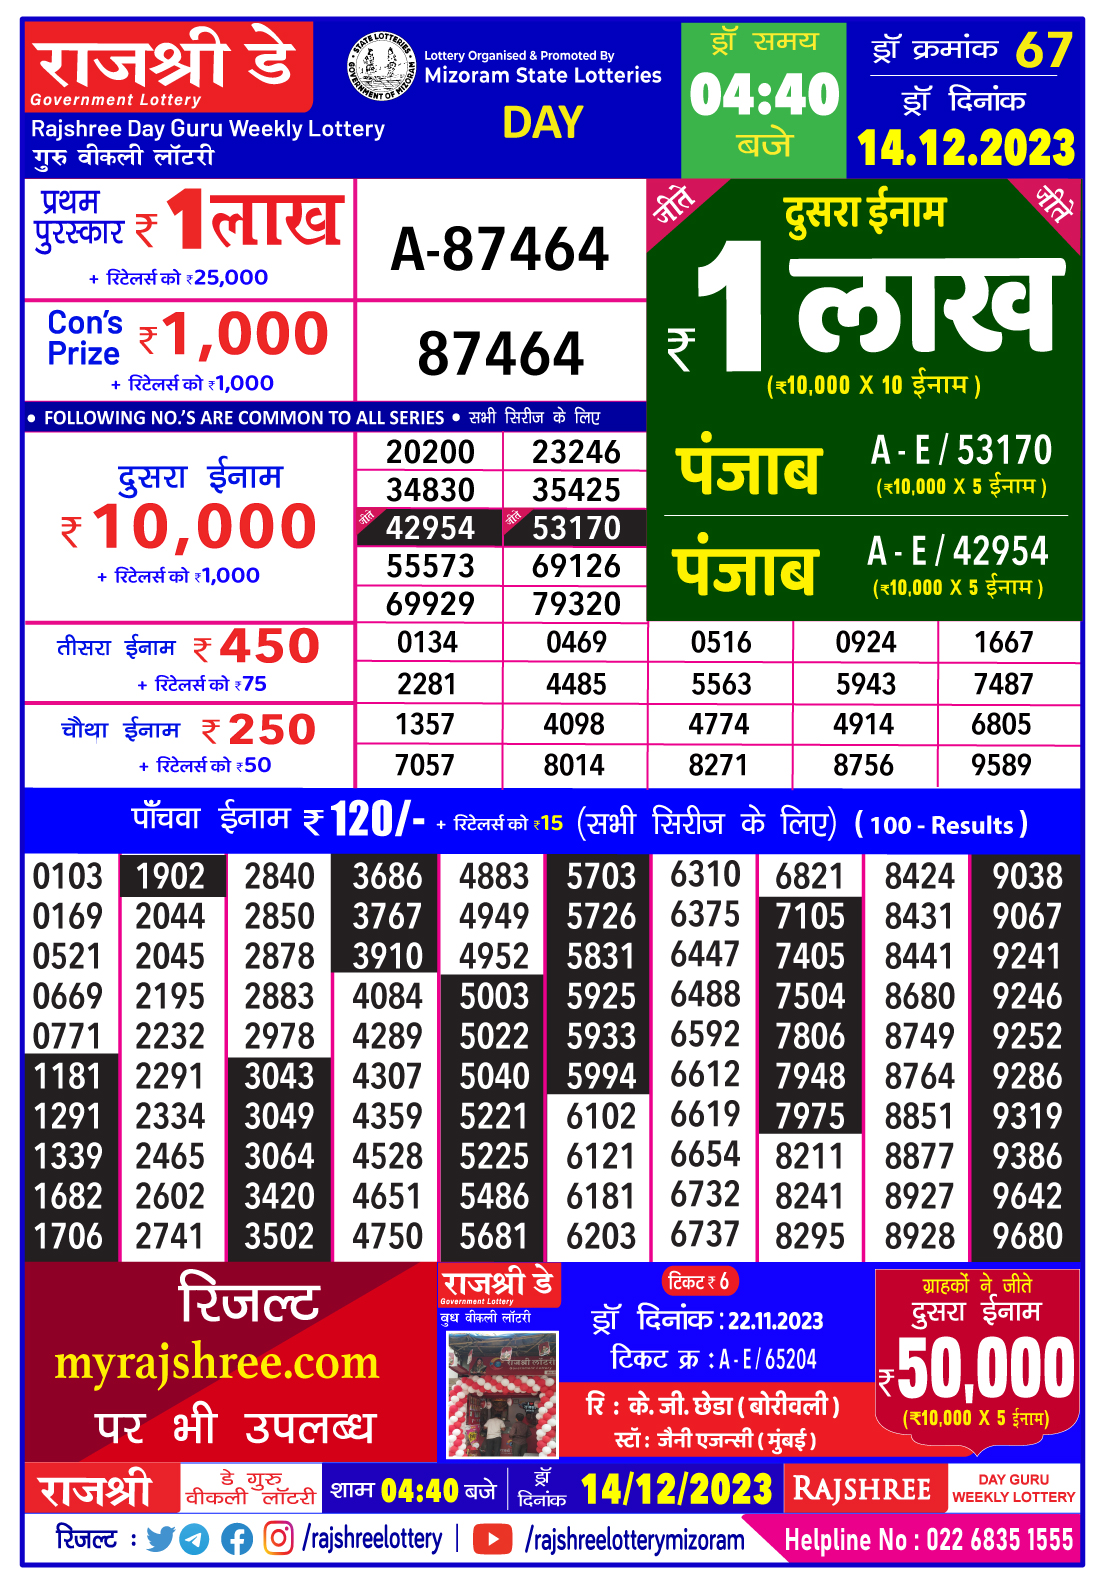 mahalaxmi lottery result 19-Apr-2018 online in India @ salonilottery.in